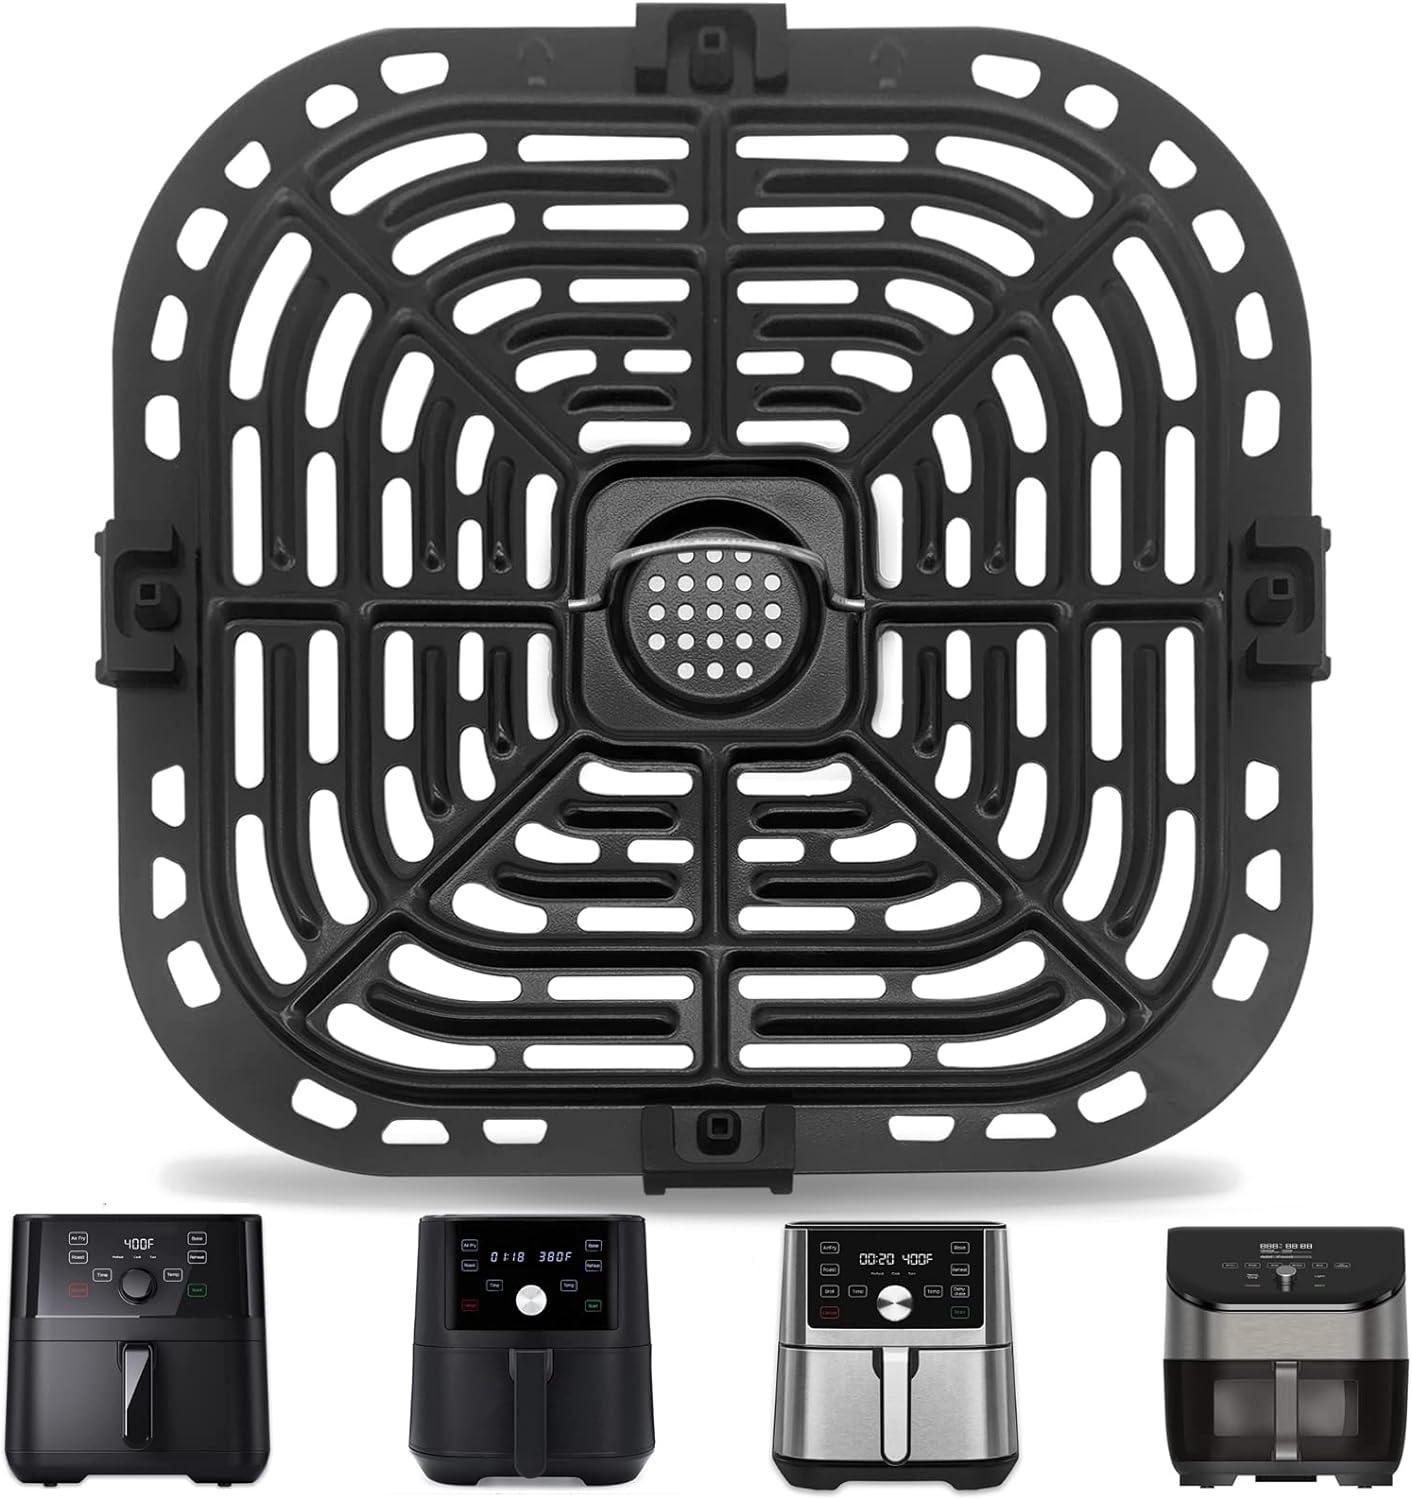 Generic Air Fryer Grill Pan, Air Fryer Grill Plate Replacement Crisper Plate Tray Rack Parts Accessories for Instant Vortex Plus 5.7 Qu